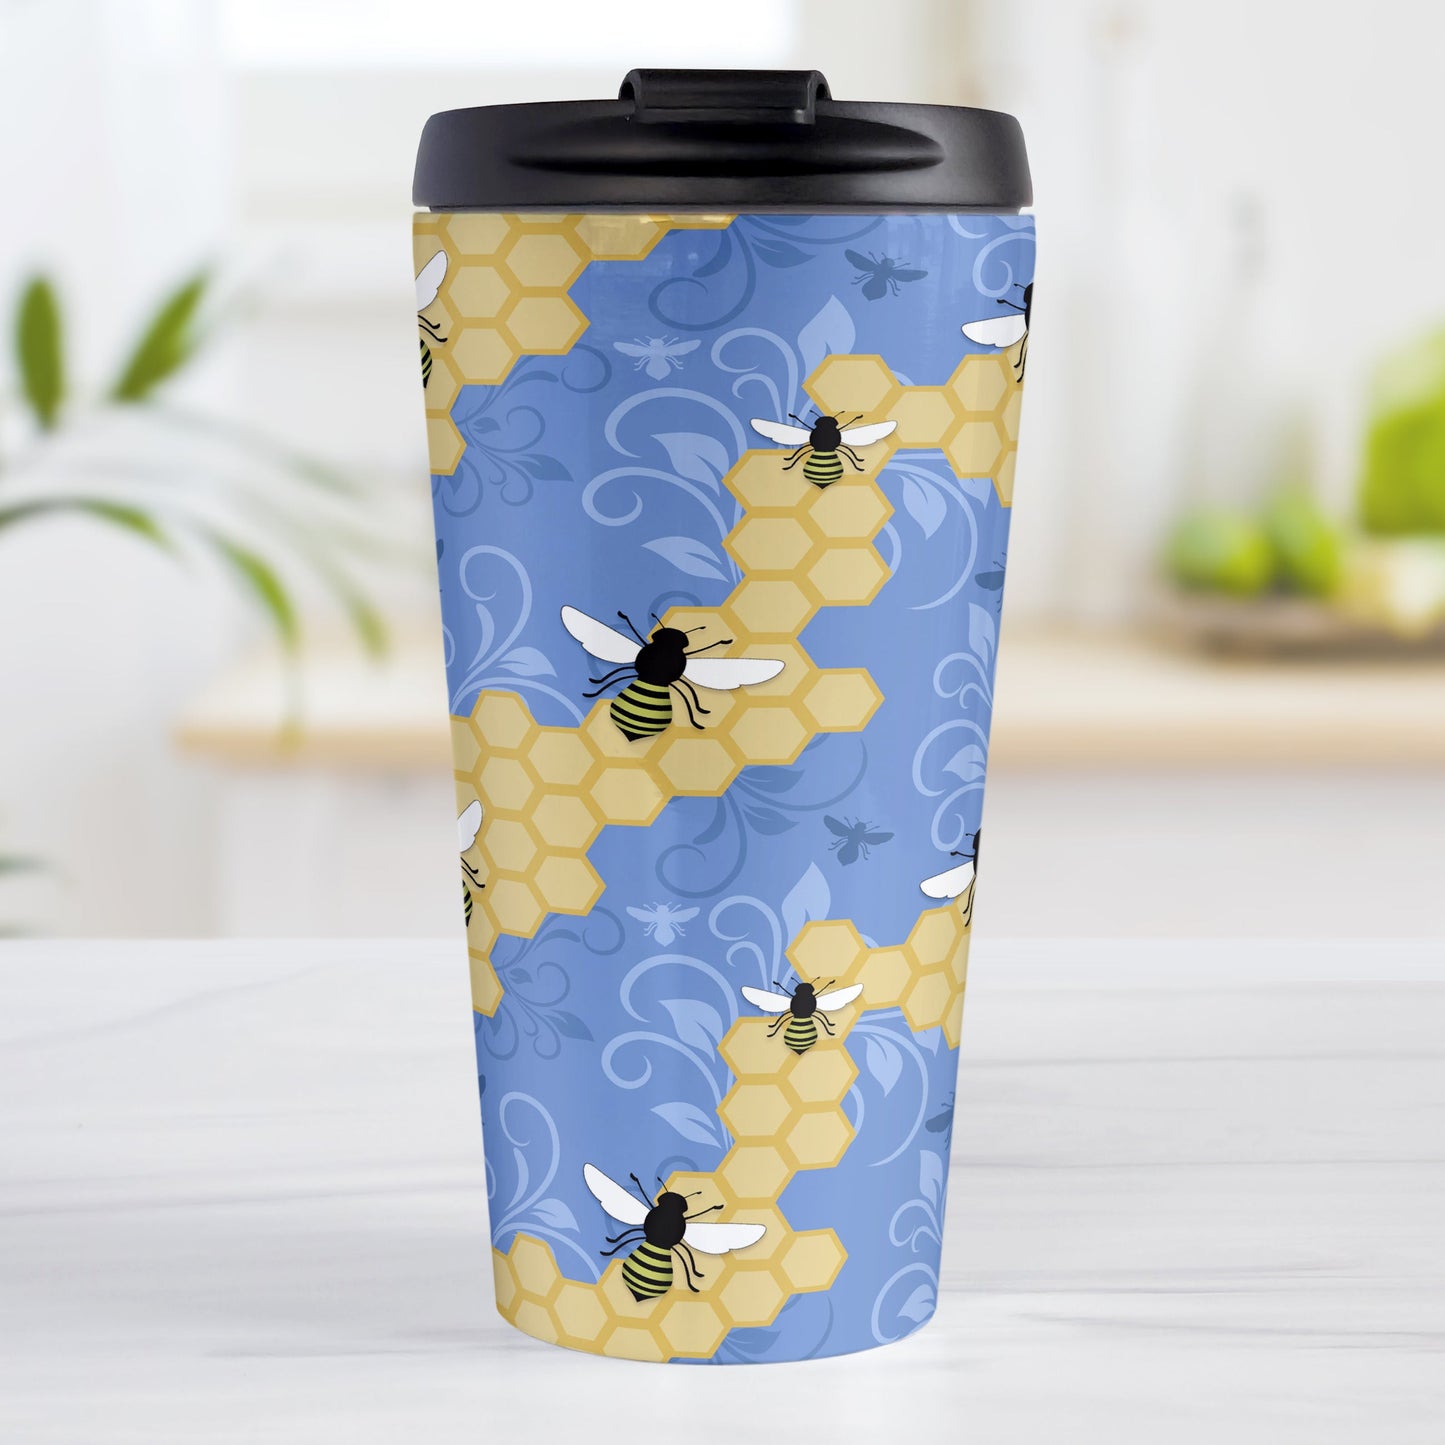 Blue Honeycomb Bee Travel Mug (15oz, stainless steel insulated) at Amy's Coffee Mugs. A travel mug designed with a pattern of black and yellow bees on honeycomb lines over a blue flourish background that wraps around the tapered shaped mug.